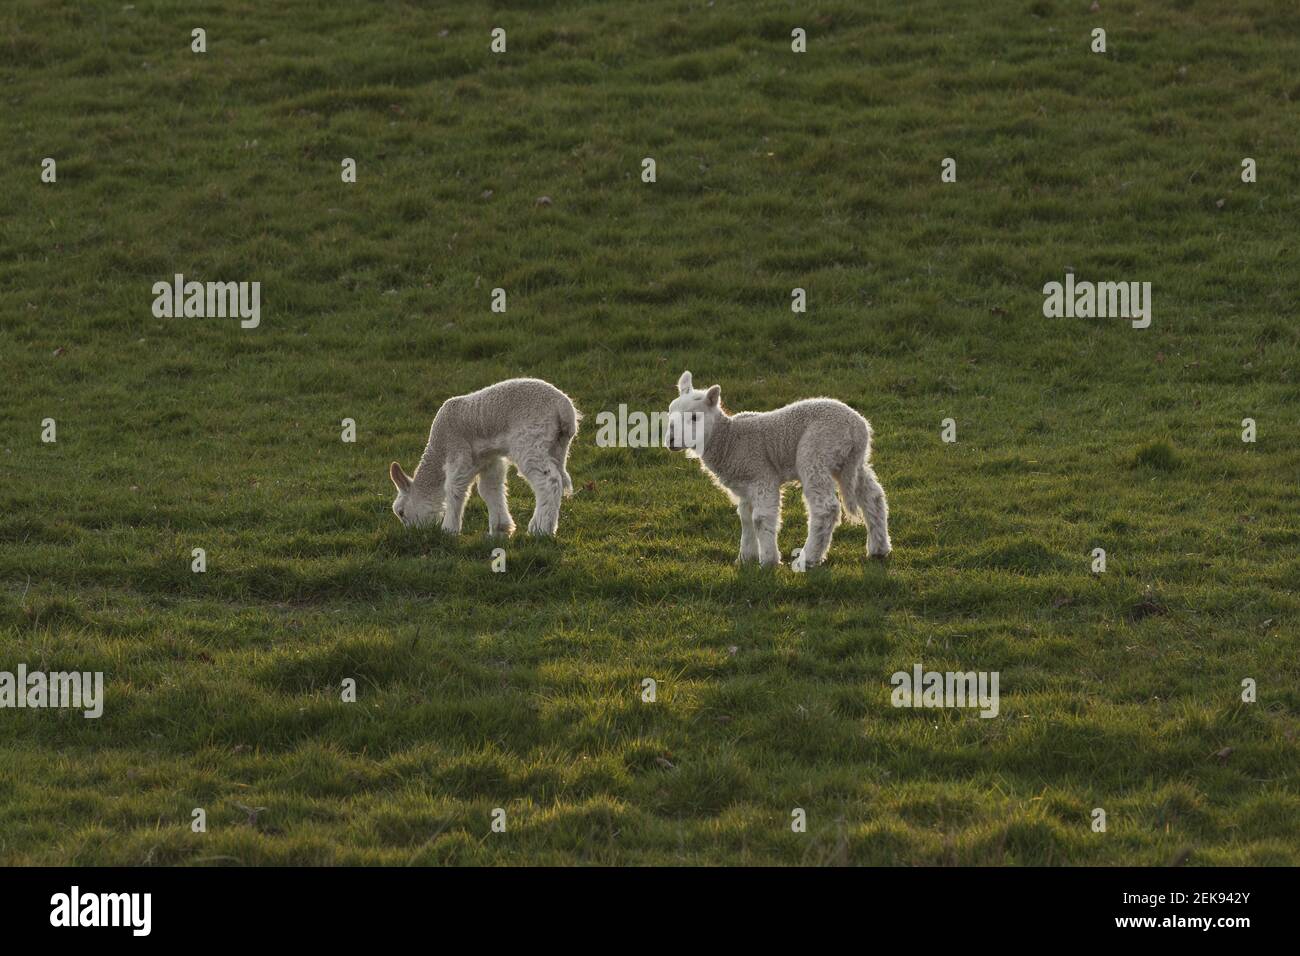 Newborn lambs (ovis aries) in a farming field outside of Welshpool, Mid Wales. UK farm animals during spring months. Stock Photo